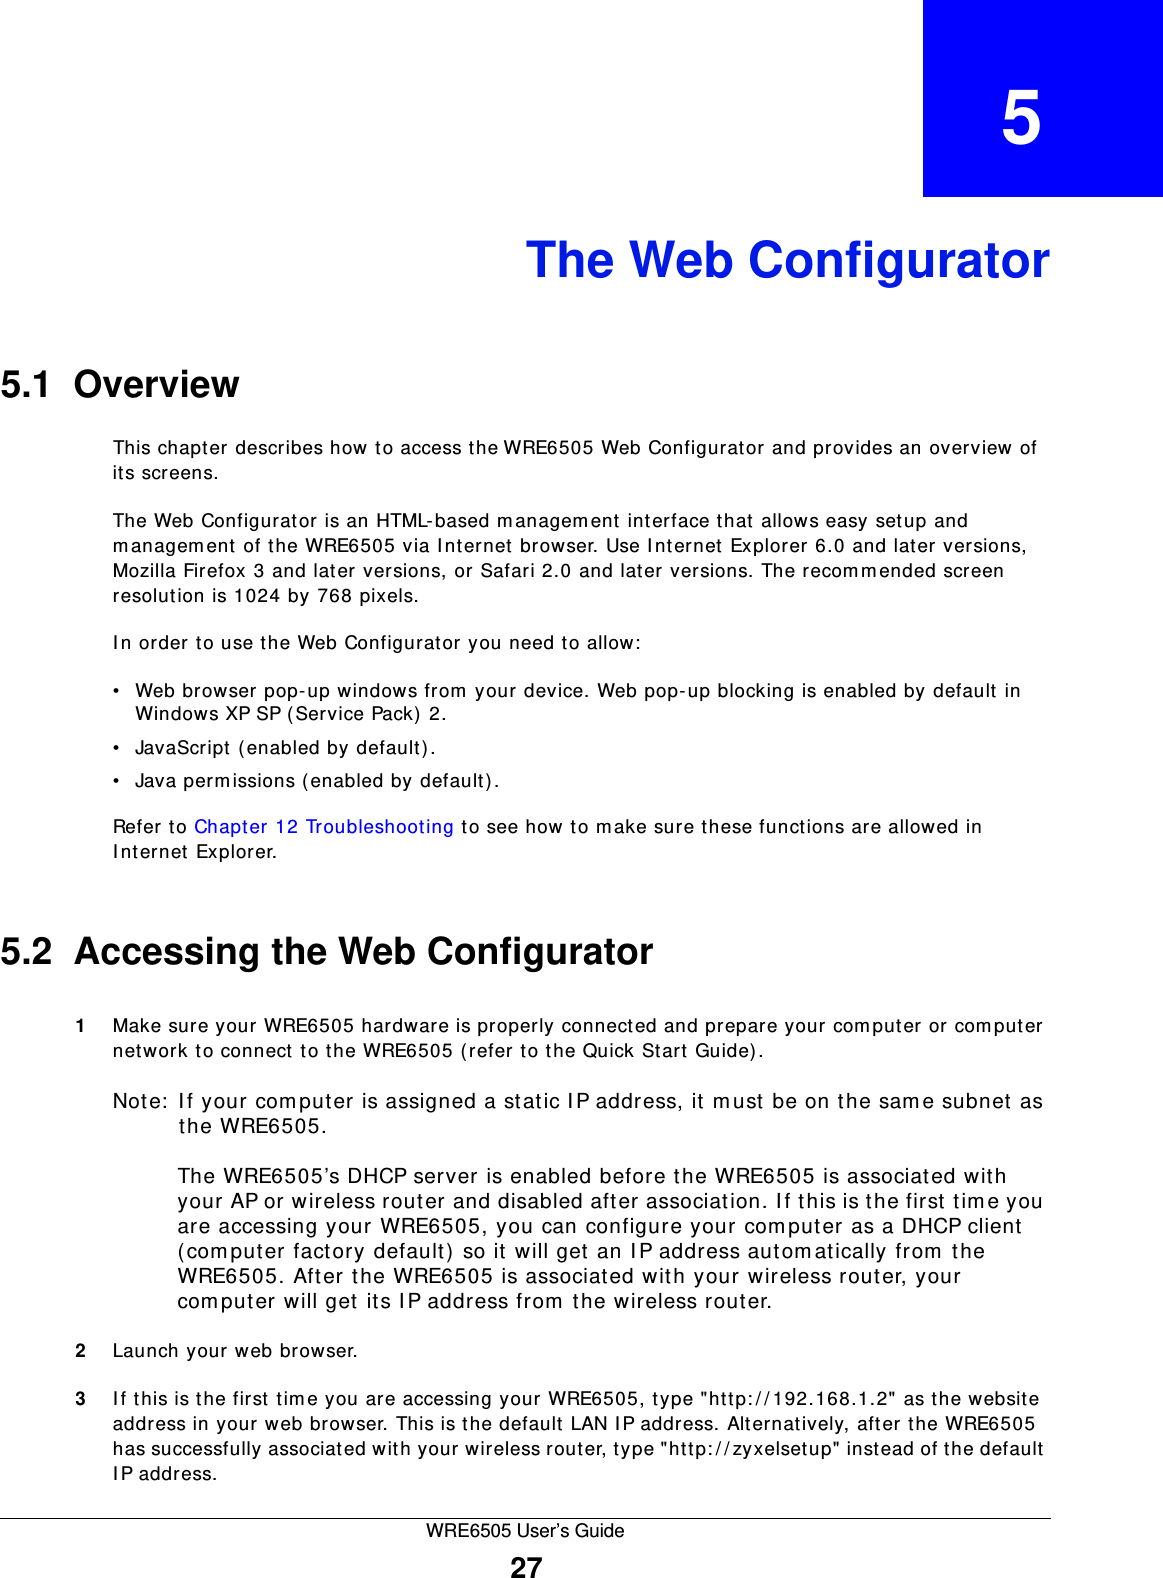 WRE6505 User’s Guide27CHAPTER   5The Web Configurator5.1  OverviewThis chapter describes how to access the WRE6505 Web Configurator and provides an overview of its screens.The Web Configurator is an HTML-based m anagem ent interface that allows easy setup and managem ent of the WRE6505 via I nternet browser. Use I nternet Explorer 6.0 and later versions, Mozilla Firefox 3 and later versions, or Safari 2.0 and later versions. The recomm ended screen resolution is 1024 by 768 pixels.In order to use the Web Configurator you need to allow:• Web browser pop-up windows from your device. Web pop-up blocking is enabled by default in Windows XP SP (Service Pack) 2.• JavaScript (enabled by default).• Java perm issions (enabled by default).Refer to Chapter 12 Troubleshooting to see how to m ake sure these functions are allowed in Internet Explorer.5.2  Accessing the Web Configurator1Make sure your WRE6505 hardware is properly connected and prepare your computer or computer network to connect to the WRE6505 (refer to the Quick Start Guide).Note:  I f your com put er is assigned a static I P address, it m ust be on the sam e subnet as the WRE6505.The WRE6505’s DHCP server is enabled before the WRE6505 is associated with your AP or wireless router and disabled after association. I f this is the first time you are accessing your WRE6505, you can configure your com puter as a DHCP client (computer factory default) so it will get an I P address autom atically from the WRE6505. After the WRE6505 is associated with your wireless router, your computer will get its I P address from the wireless router.2Launch your web browser.3If this is the first tim e you are accessing your WRE6505, type &quot;http: / / 192.168.1.2&quot; as the website address in your web browser. This is the default LAN I P address. Alternatively, aft er the WRE6505 has successfully associated with your wireless router, type &quot;http: / / zyxelsetup&quot; instead of the default IP address.